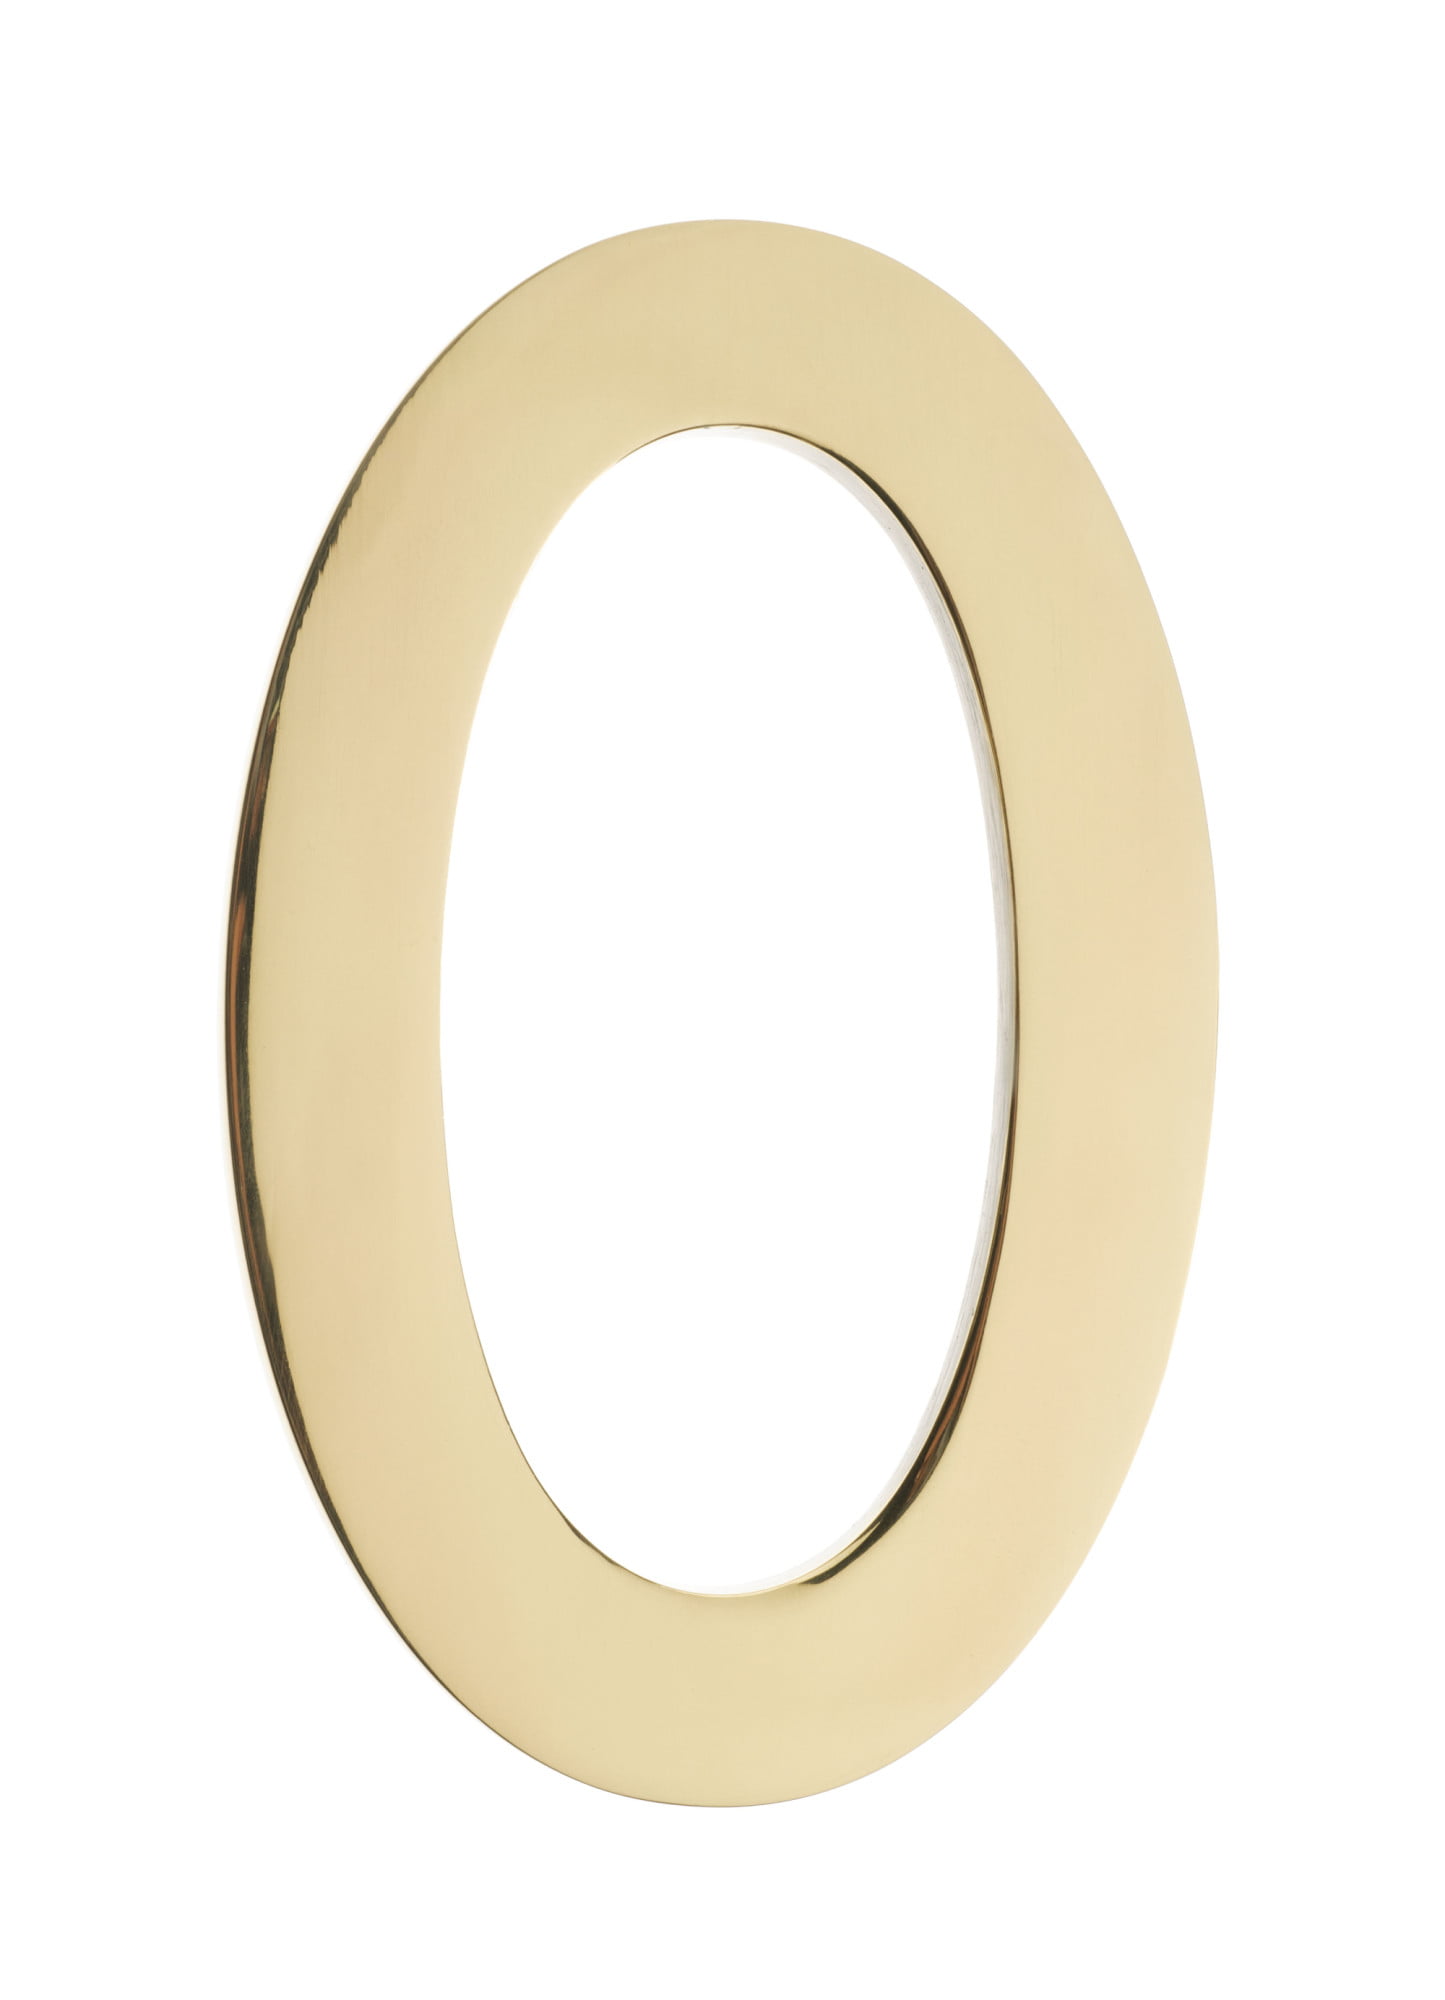 3582pb-0 Floating House Number 0, Polished Brass - 4 In.